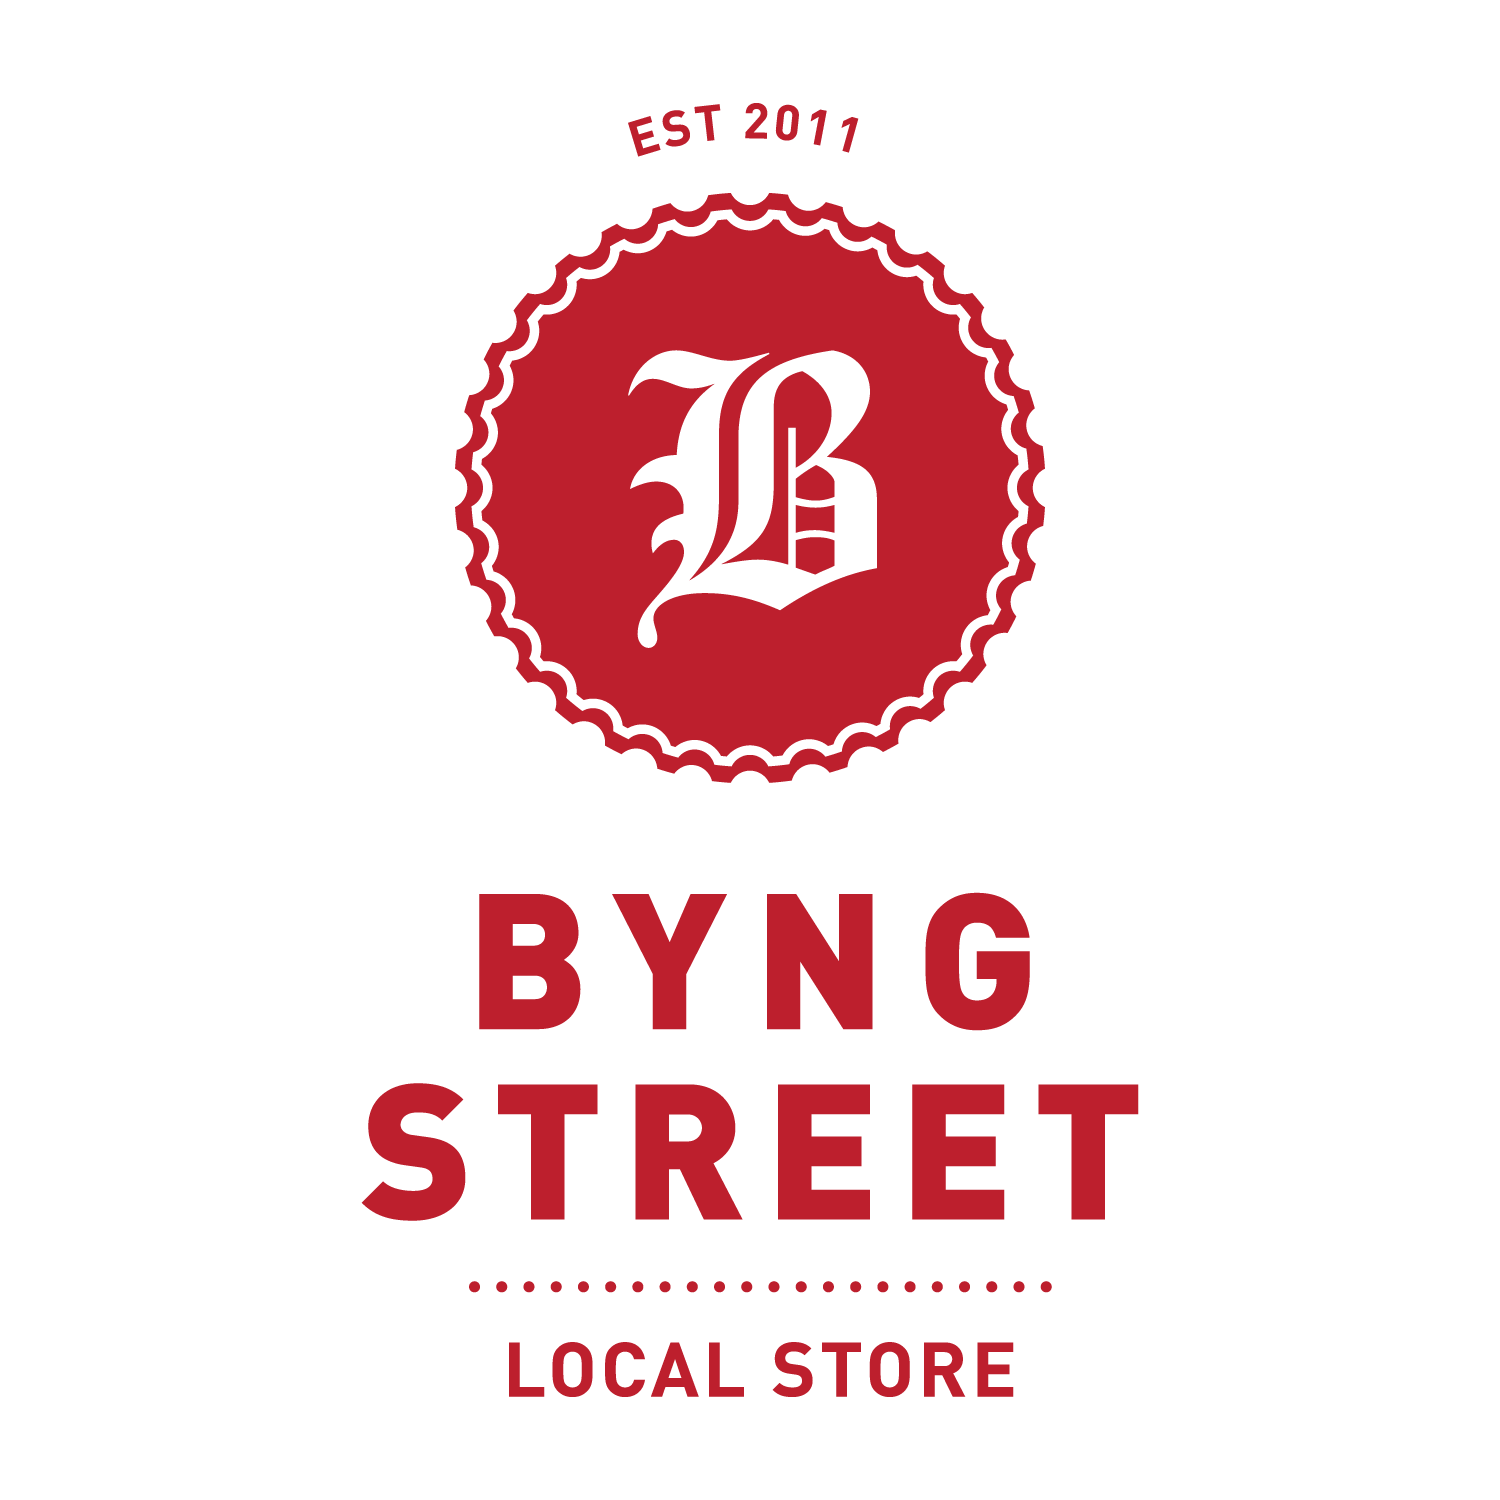 Byng Street Local Store